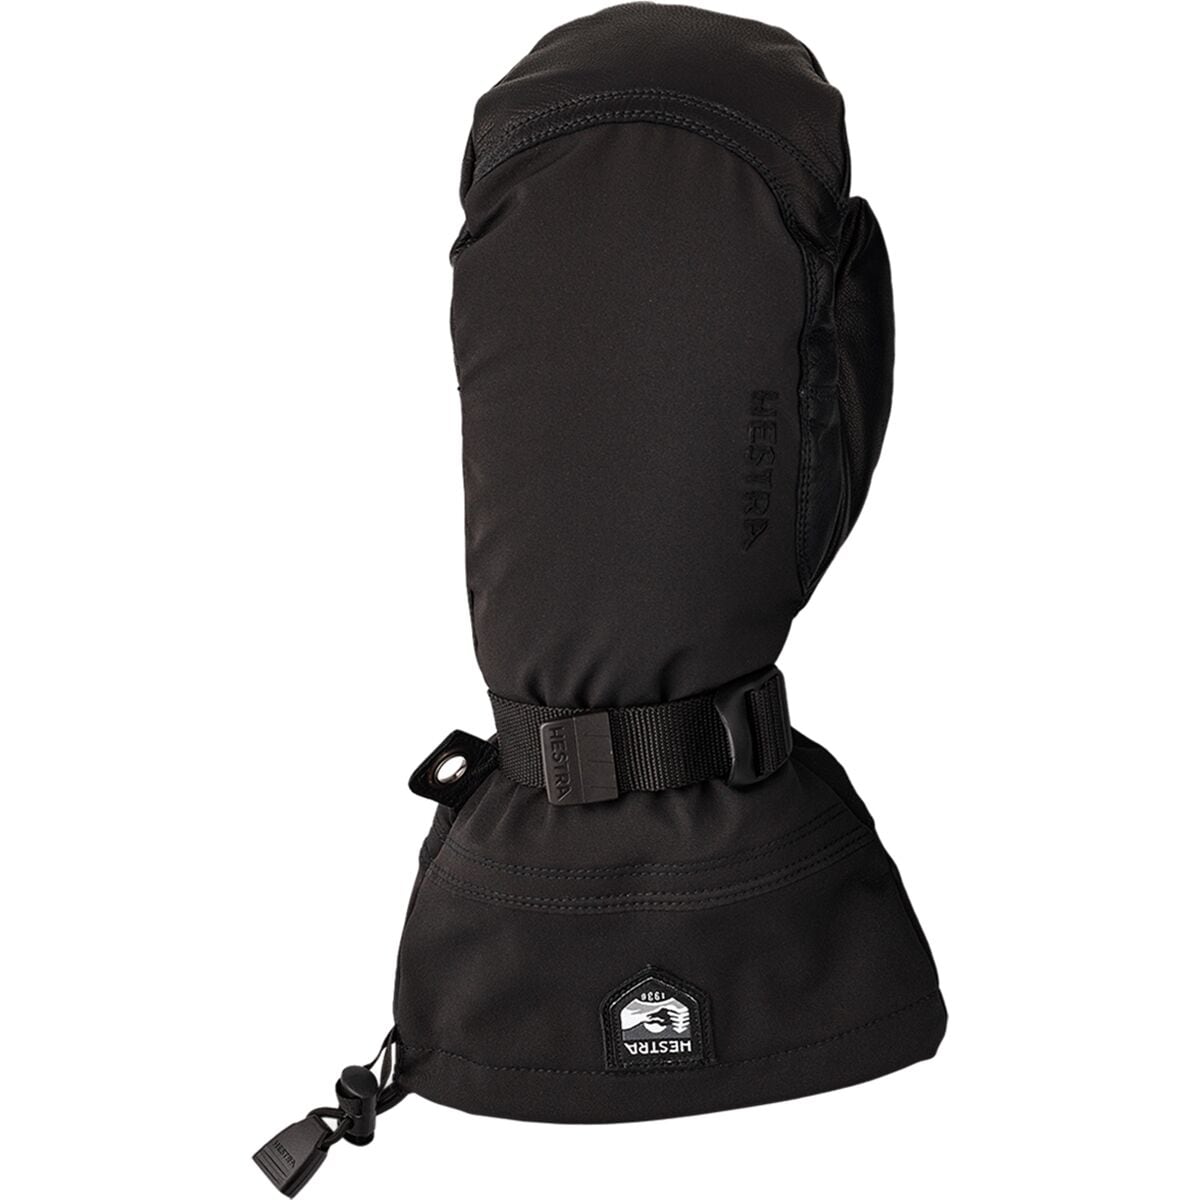 https://www.backcountry.com/images/items/1200/HES/HES000C/BLA.jpg